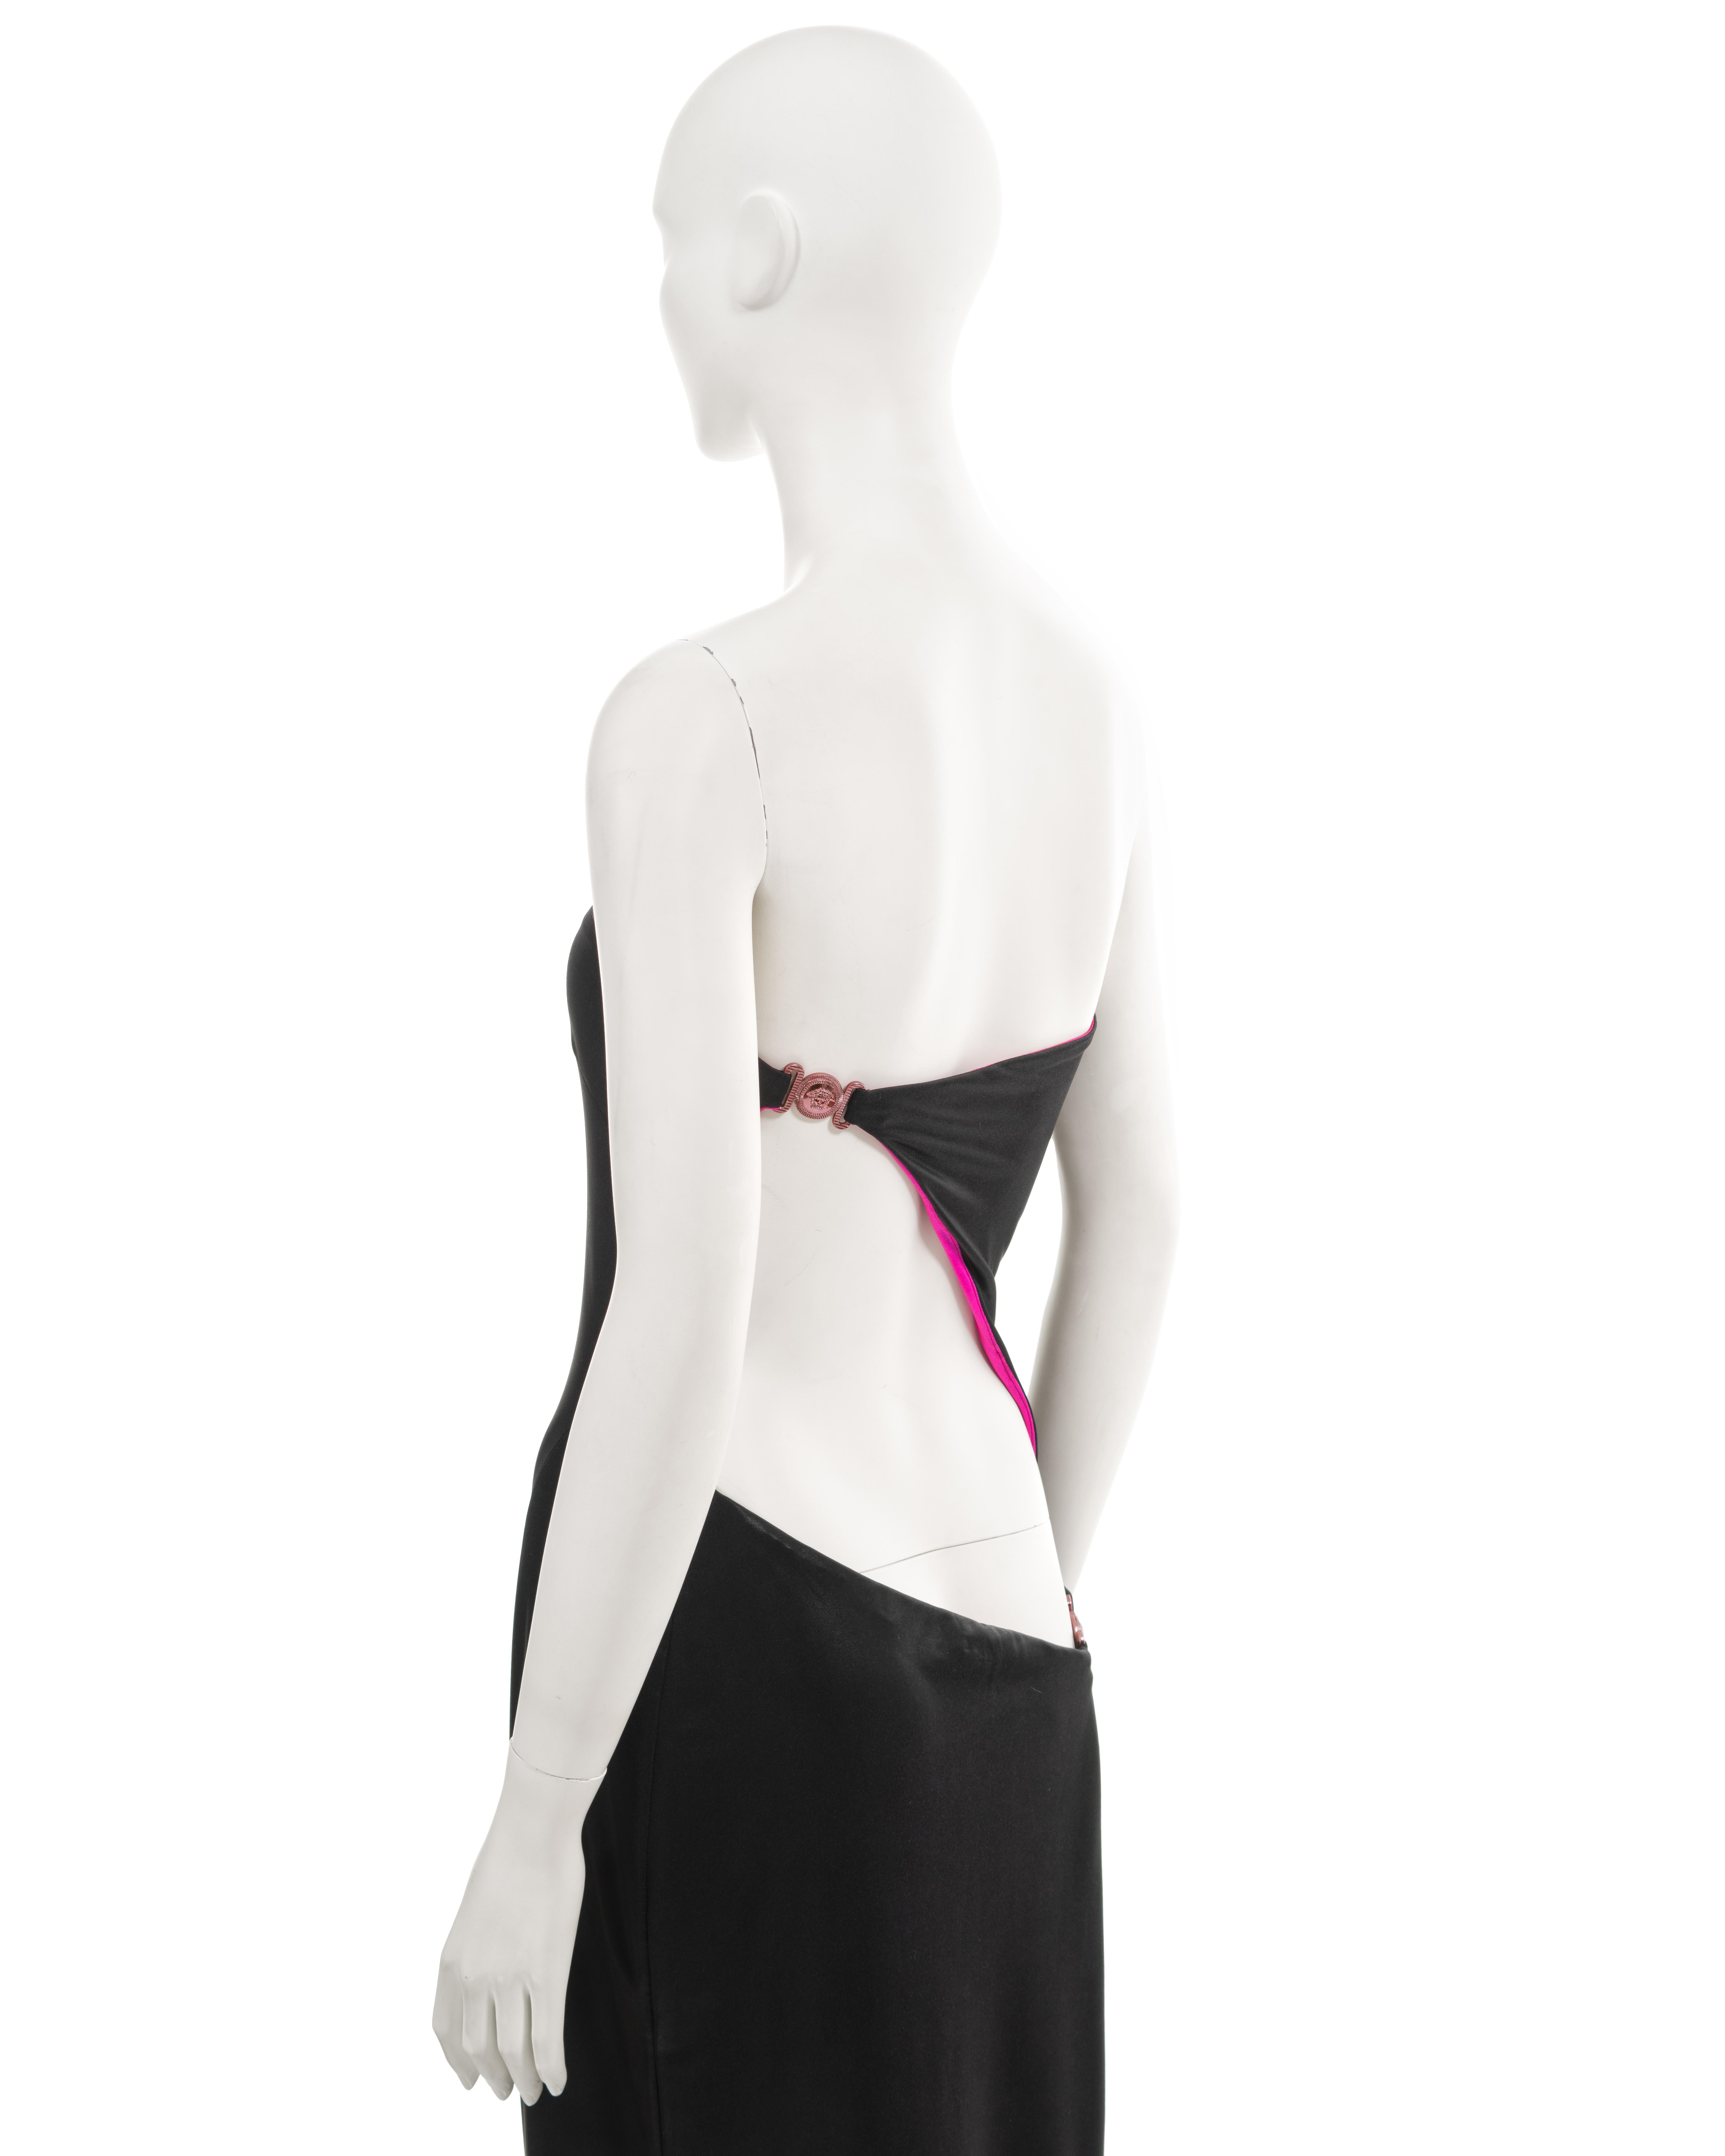 Gianni Versace black wet-look strapless evening dress with cut outs, ss 1998 For Sale 11